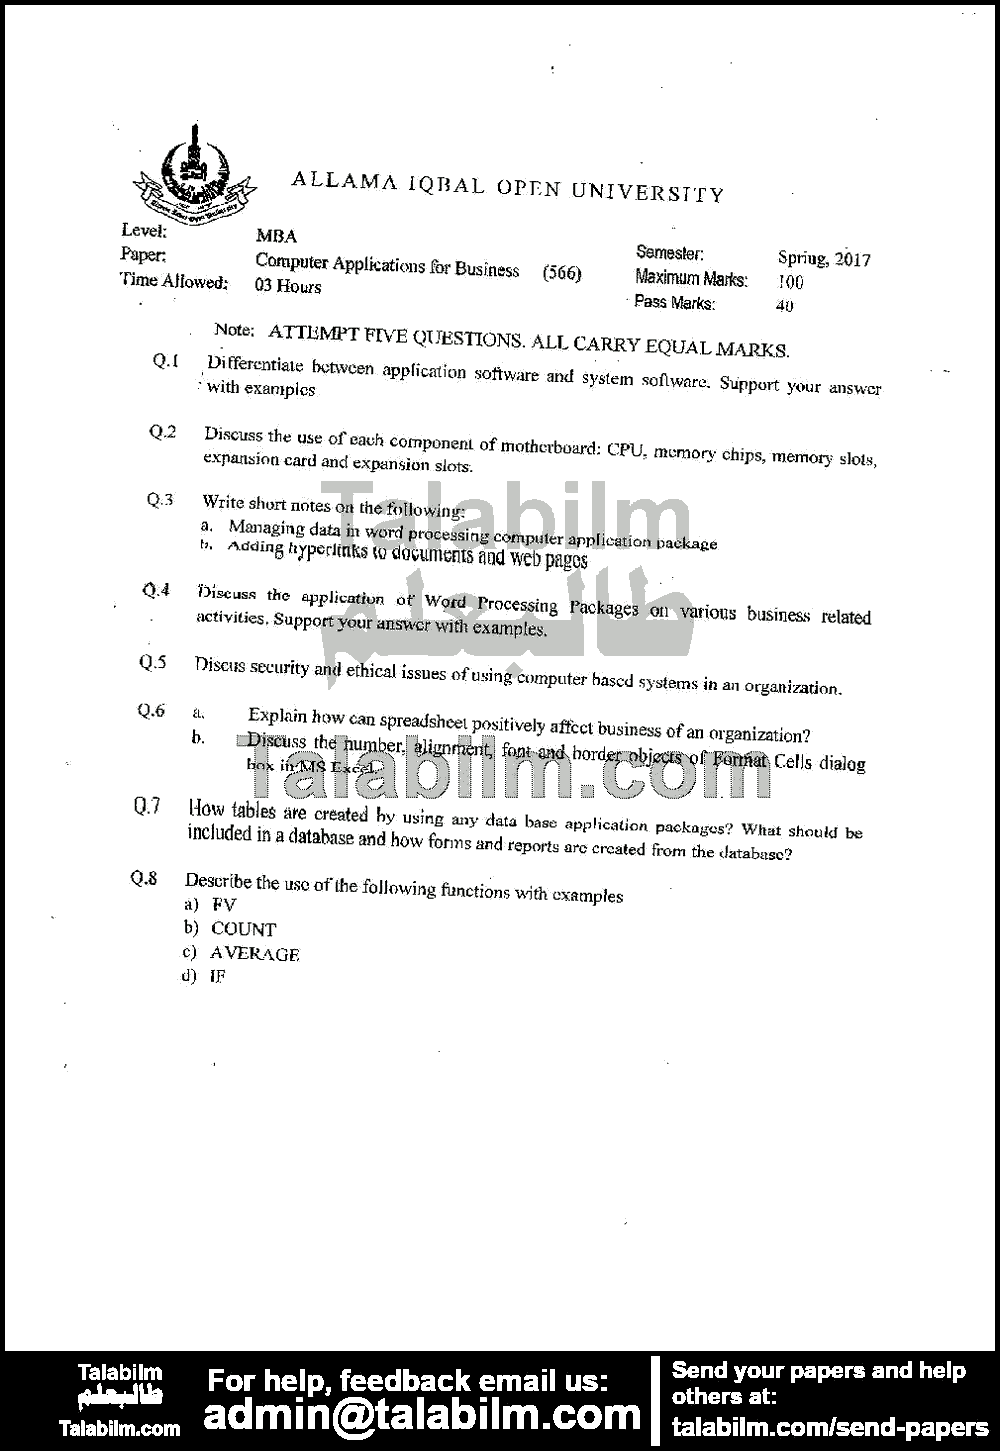 Computers Application for Business 566 past paper for Spring 2017